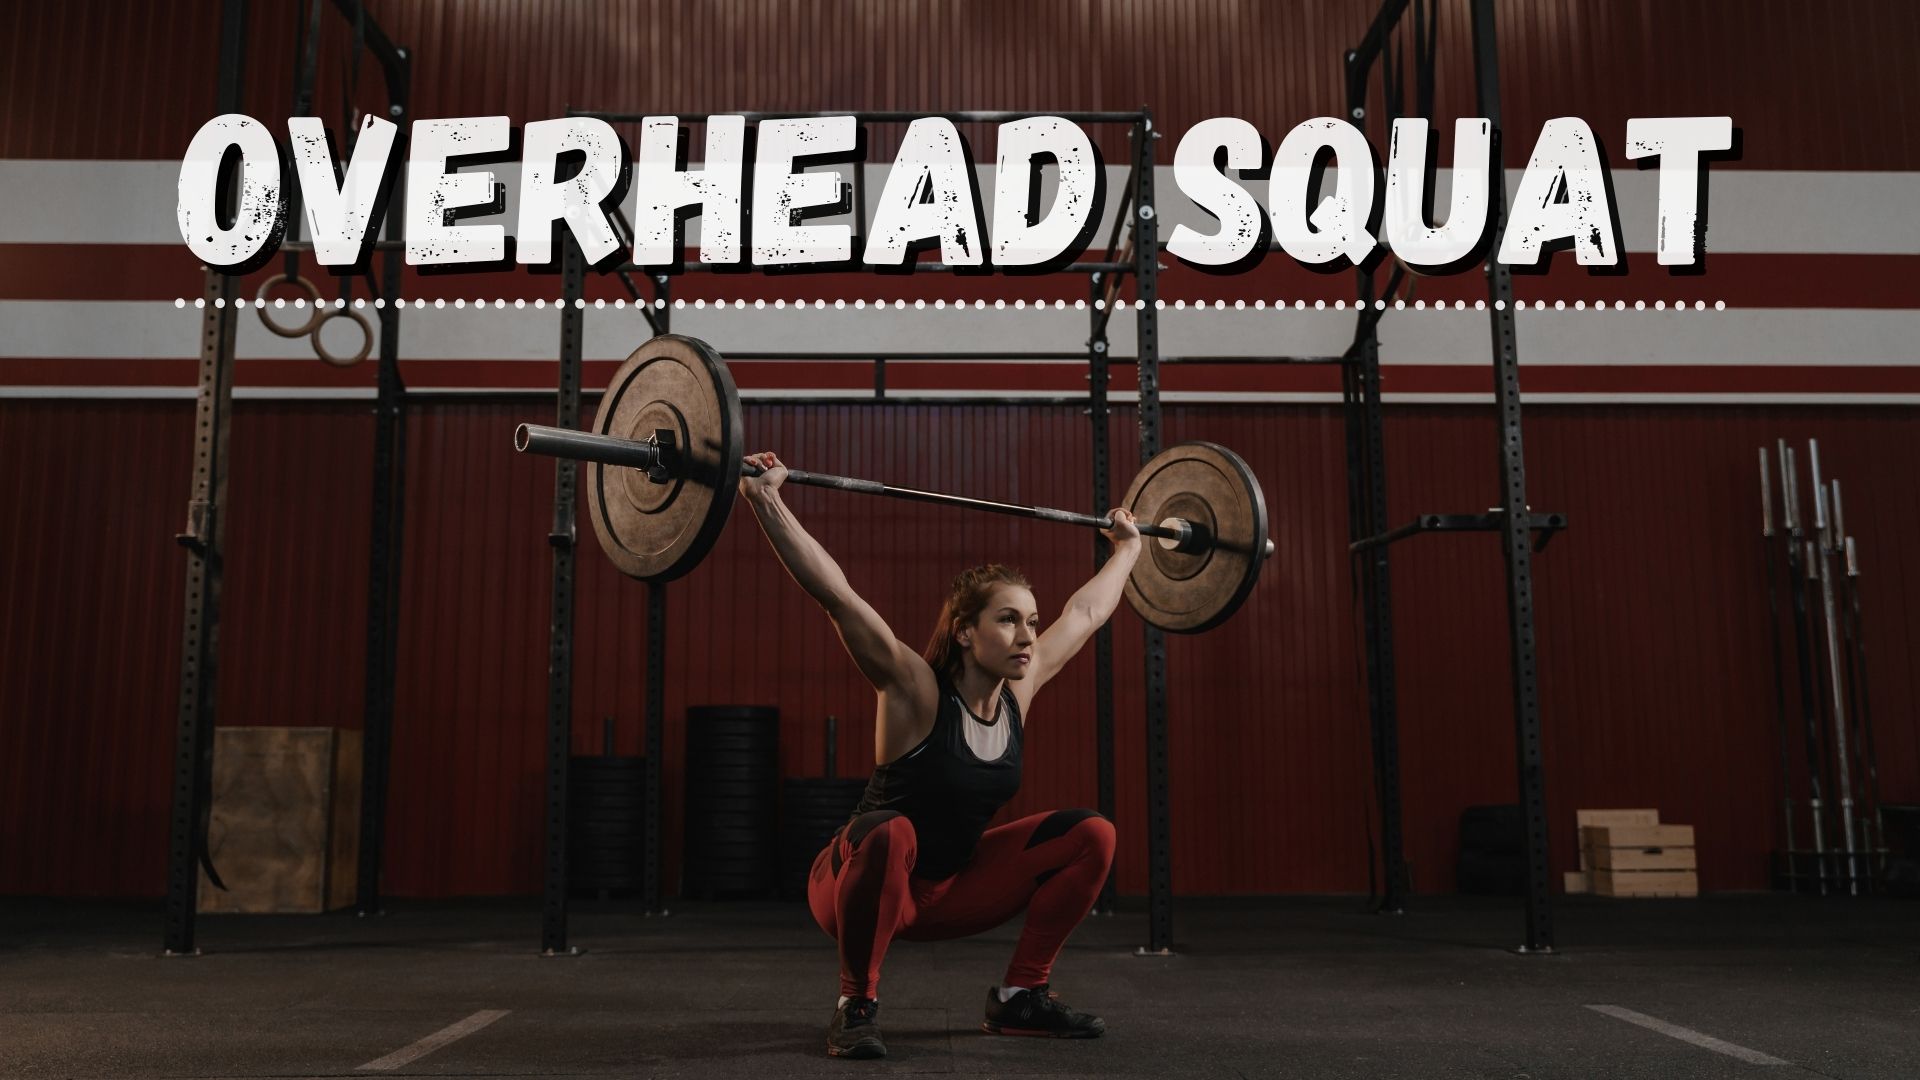 Detailed Overhead Squat Guide: Variations, Instructions, Alternatives